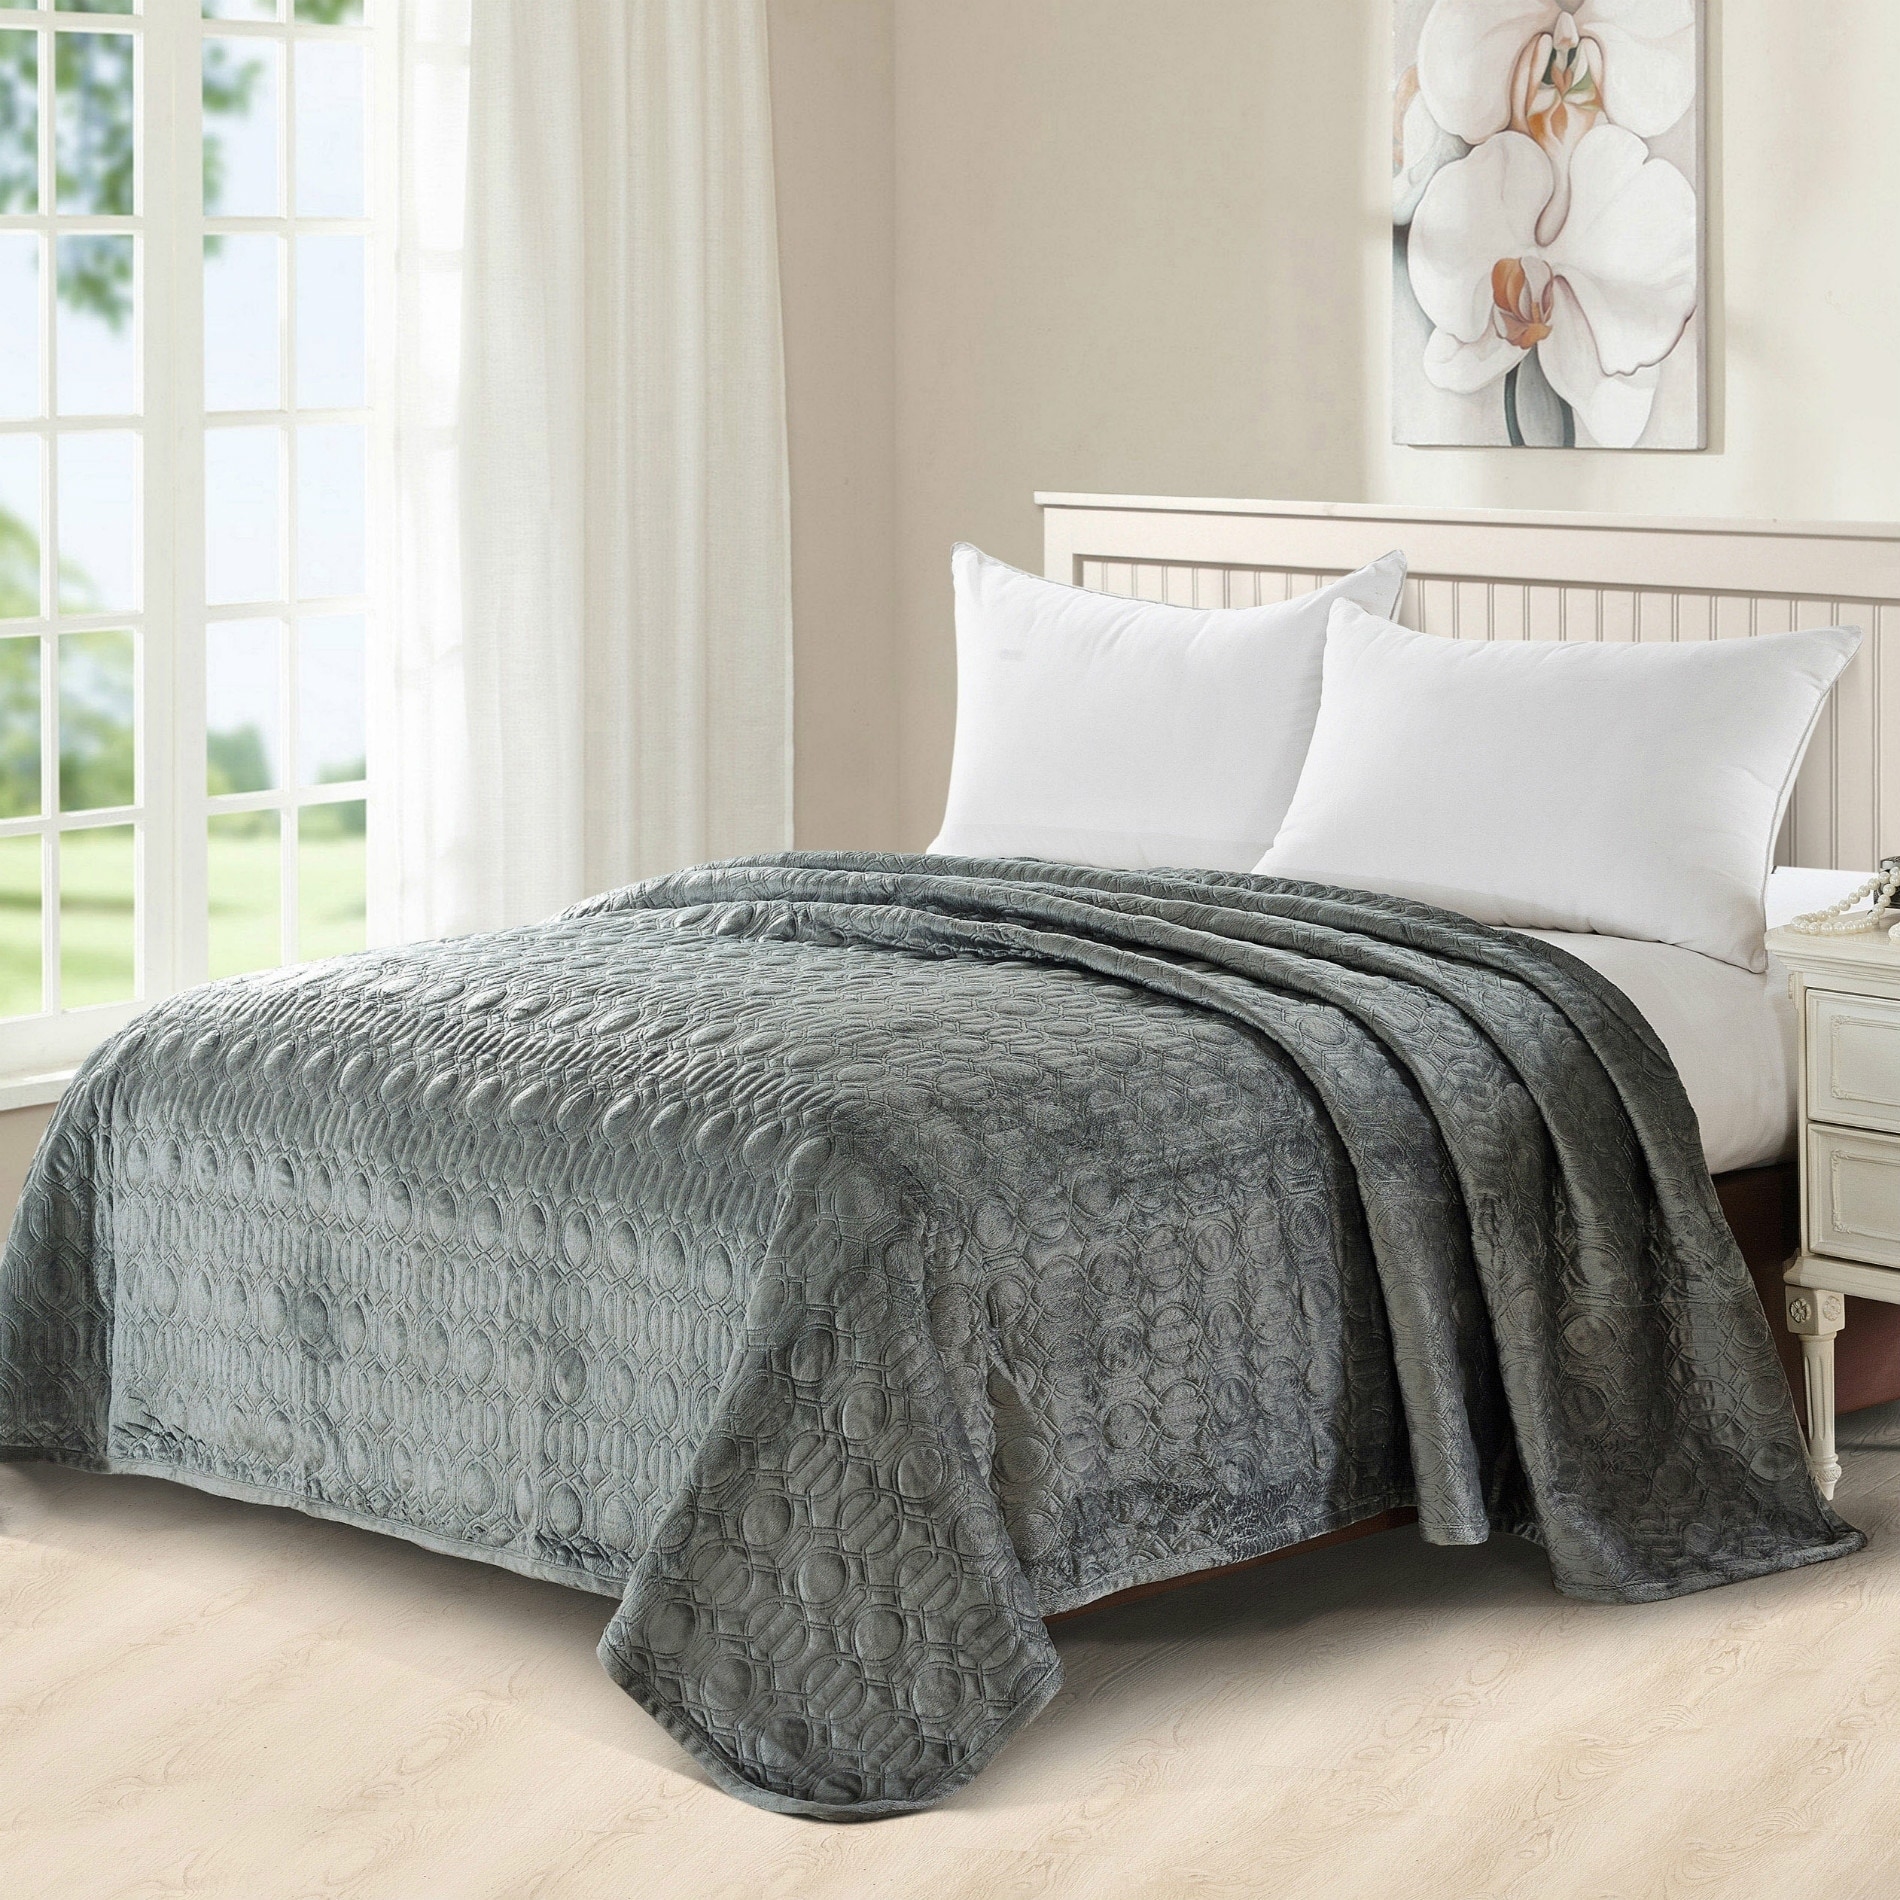 Shop Serenta Microplush Quilted Coverlet On Sale Free Shipping